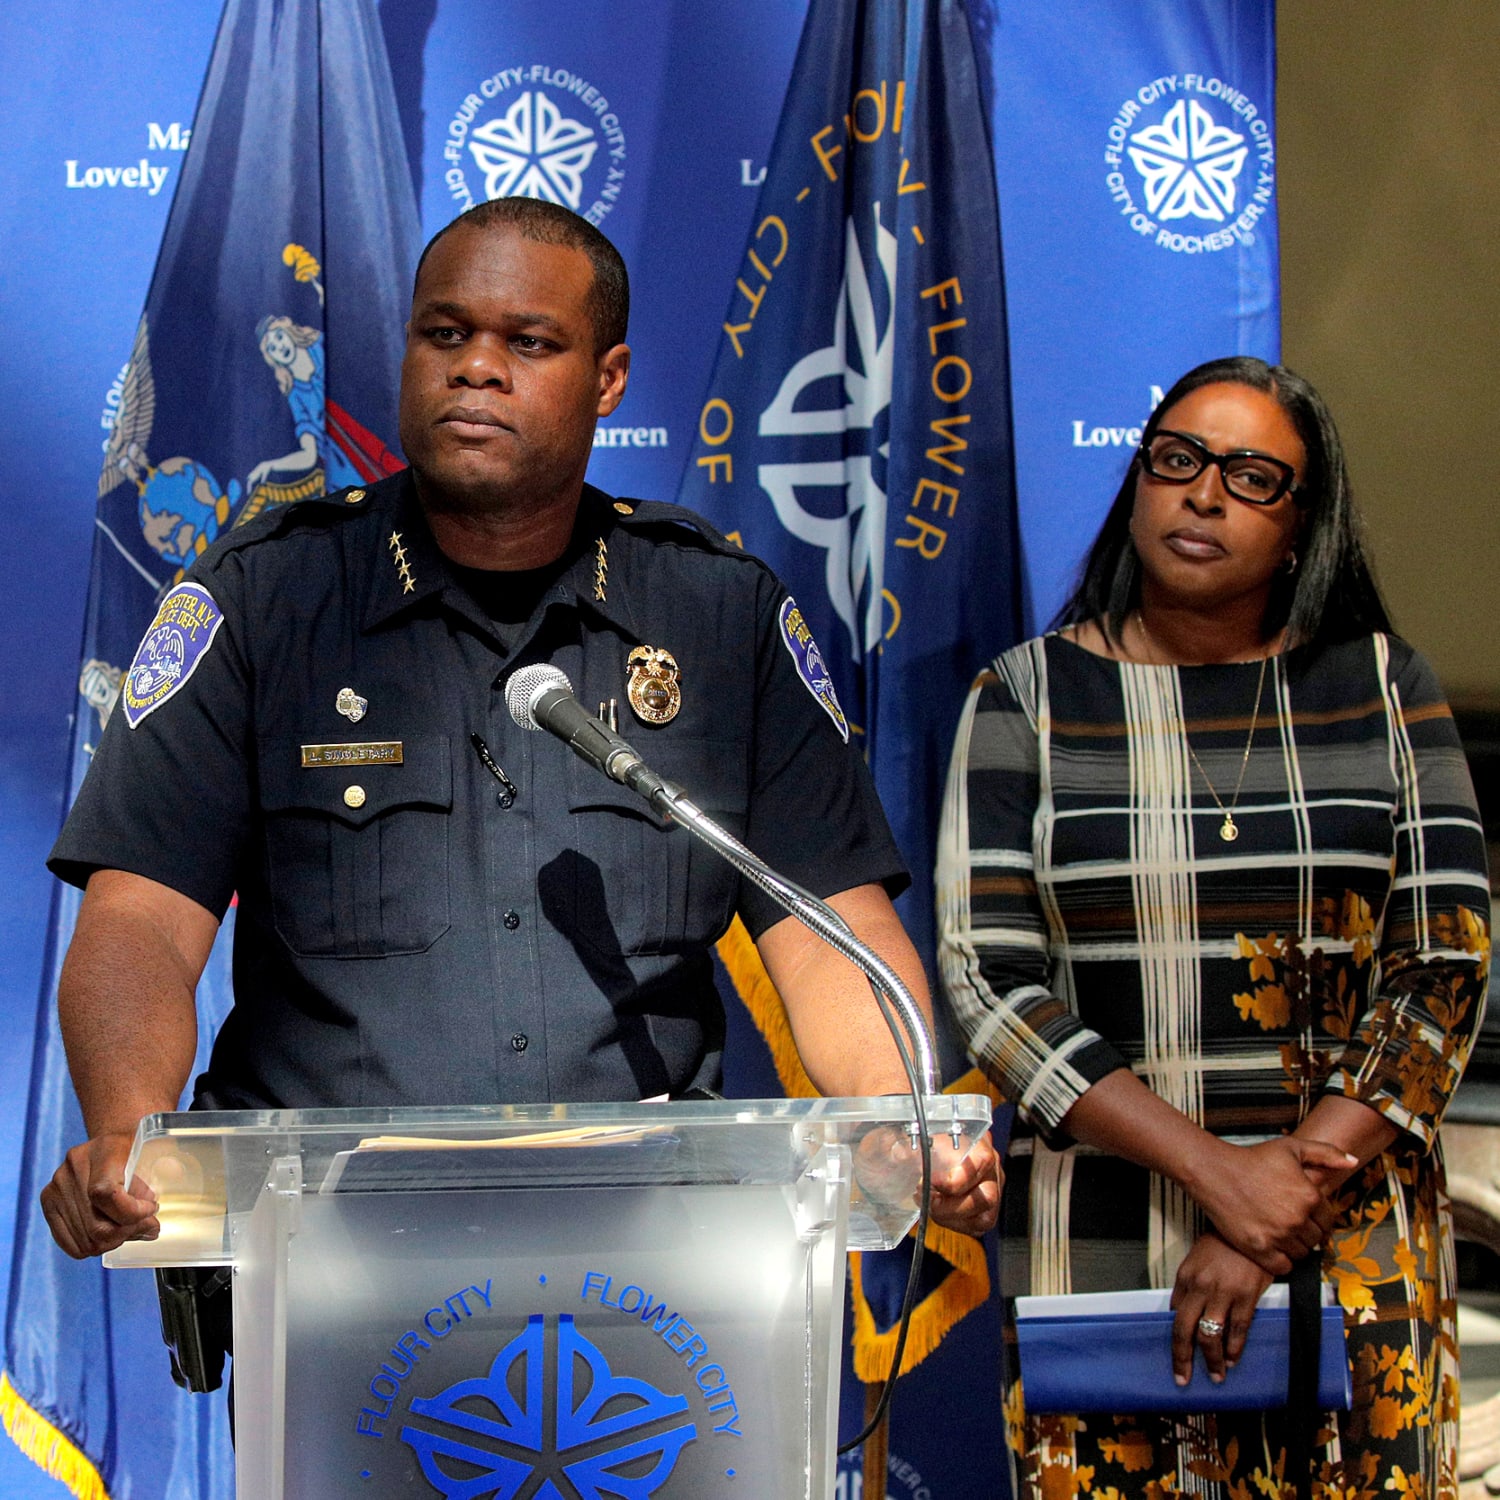 Rochester Police Chief and Entire Command Staff Retire Amid Outrage Over Death of Daniel Prude